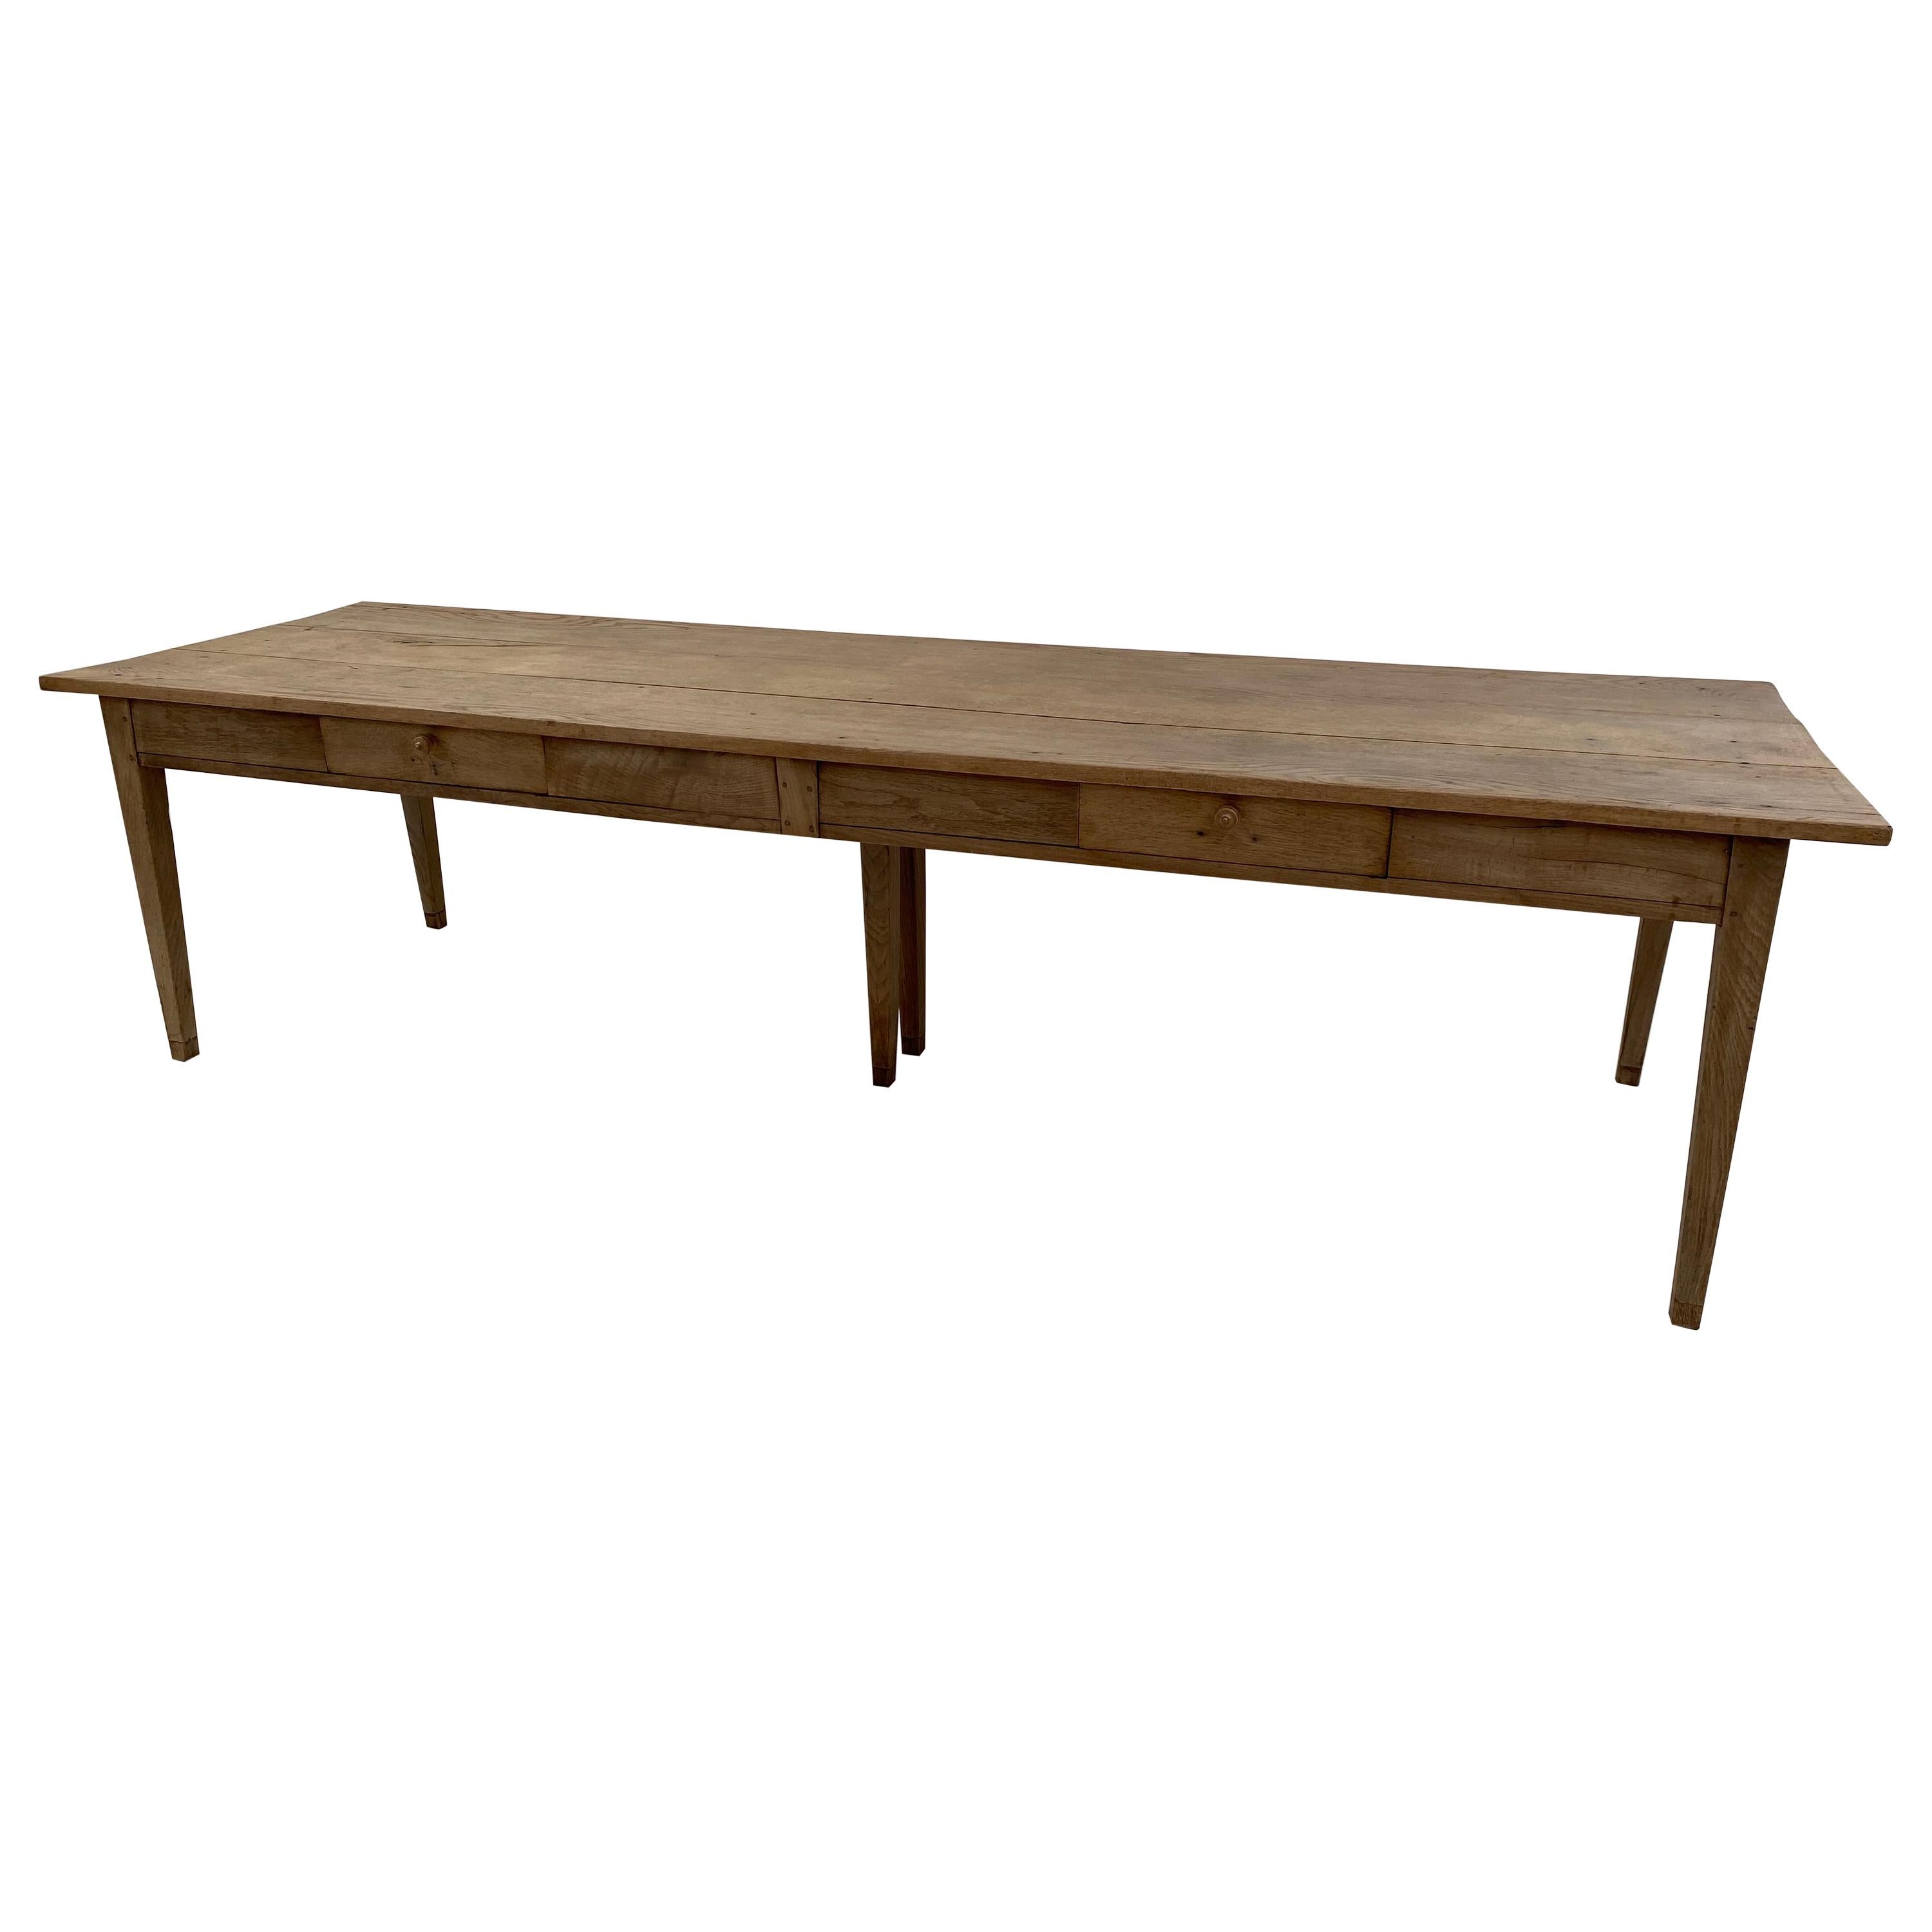 Antique French Oak Country Farm Dining Table, France.